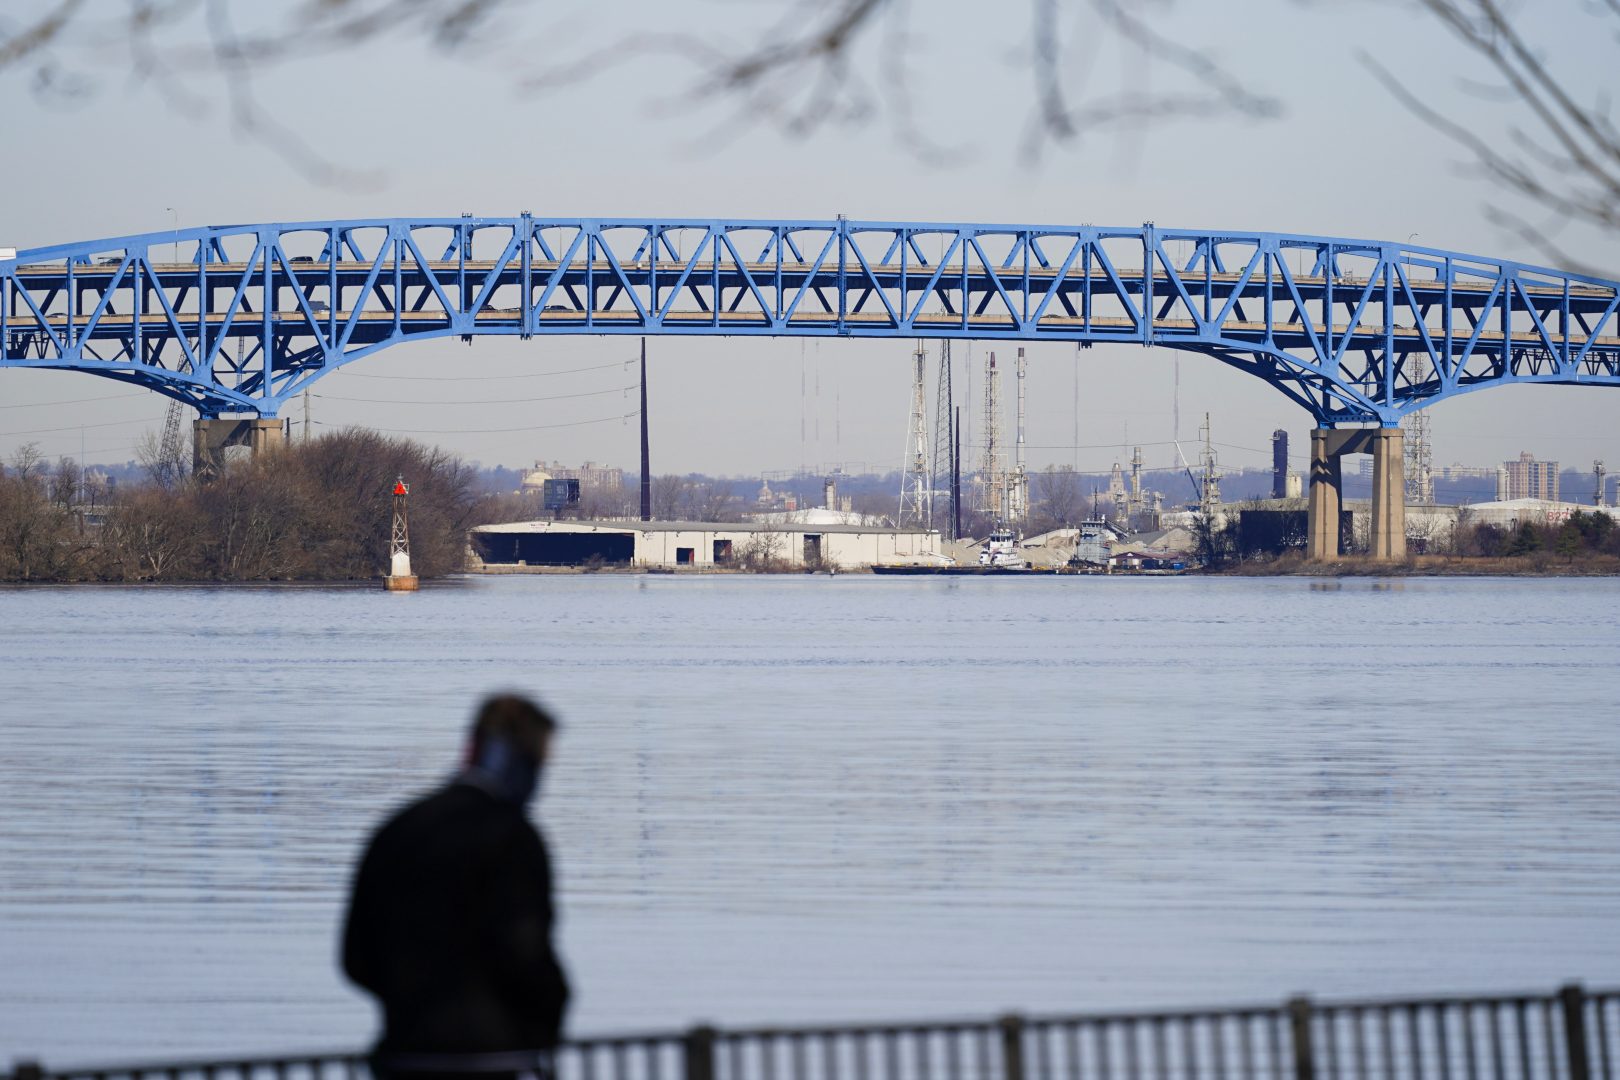 A person walks past the Interstate-95′s mile-long double-decked Girard Point Bridge in Philadelphia, Wednesday, Feb. 24, 2021. PennDOT named several bridges including the Girard Point Bridge that it said it is considering tolling to pay for the reconstruction. (AP Photo/Matt Rourke)